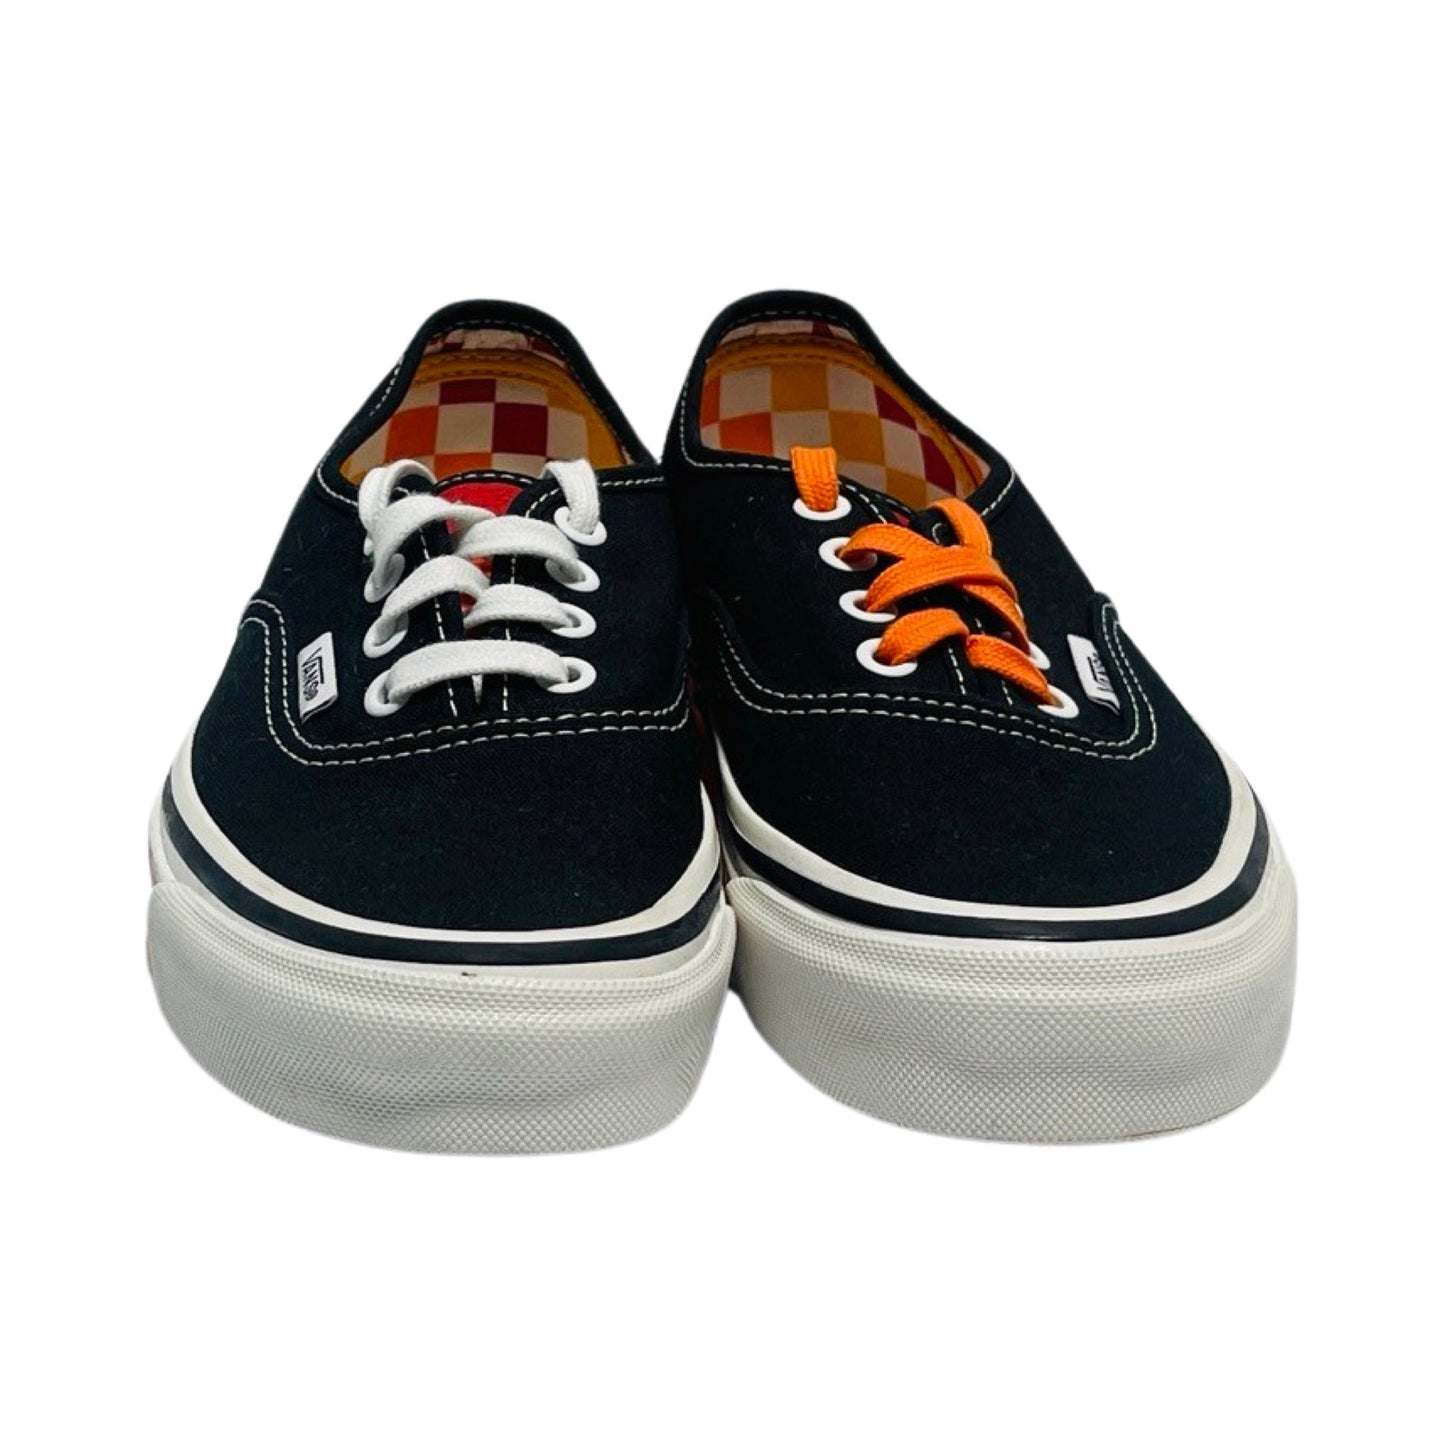 Shoes Sneakers By Vans Our Legends Size: 7